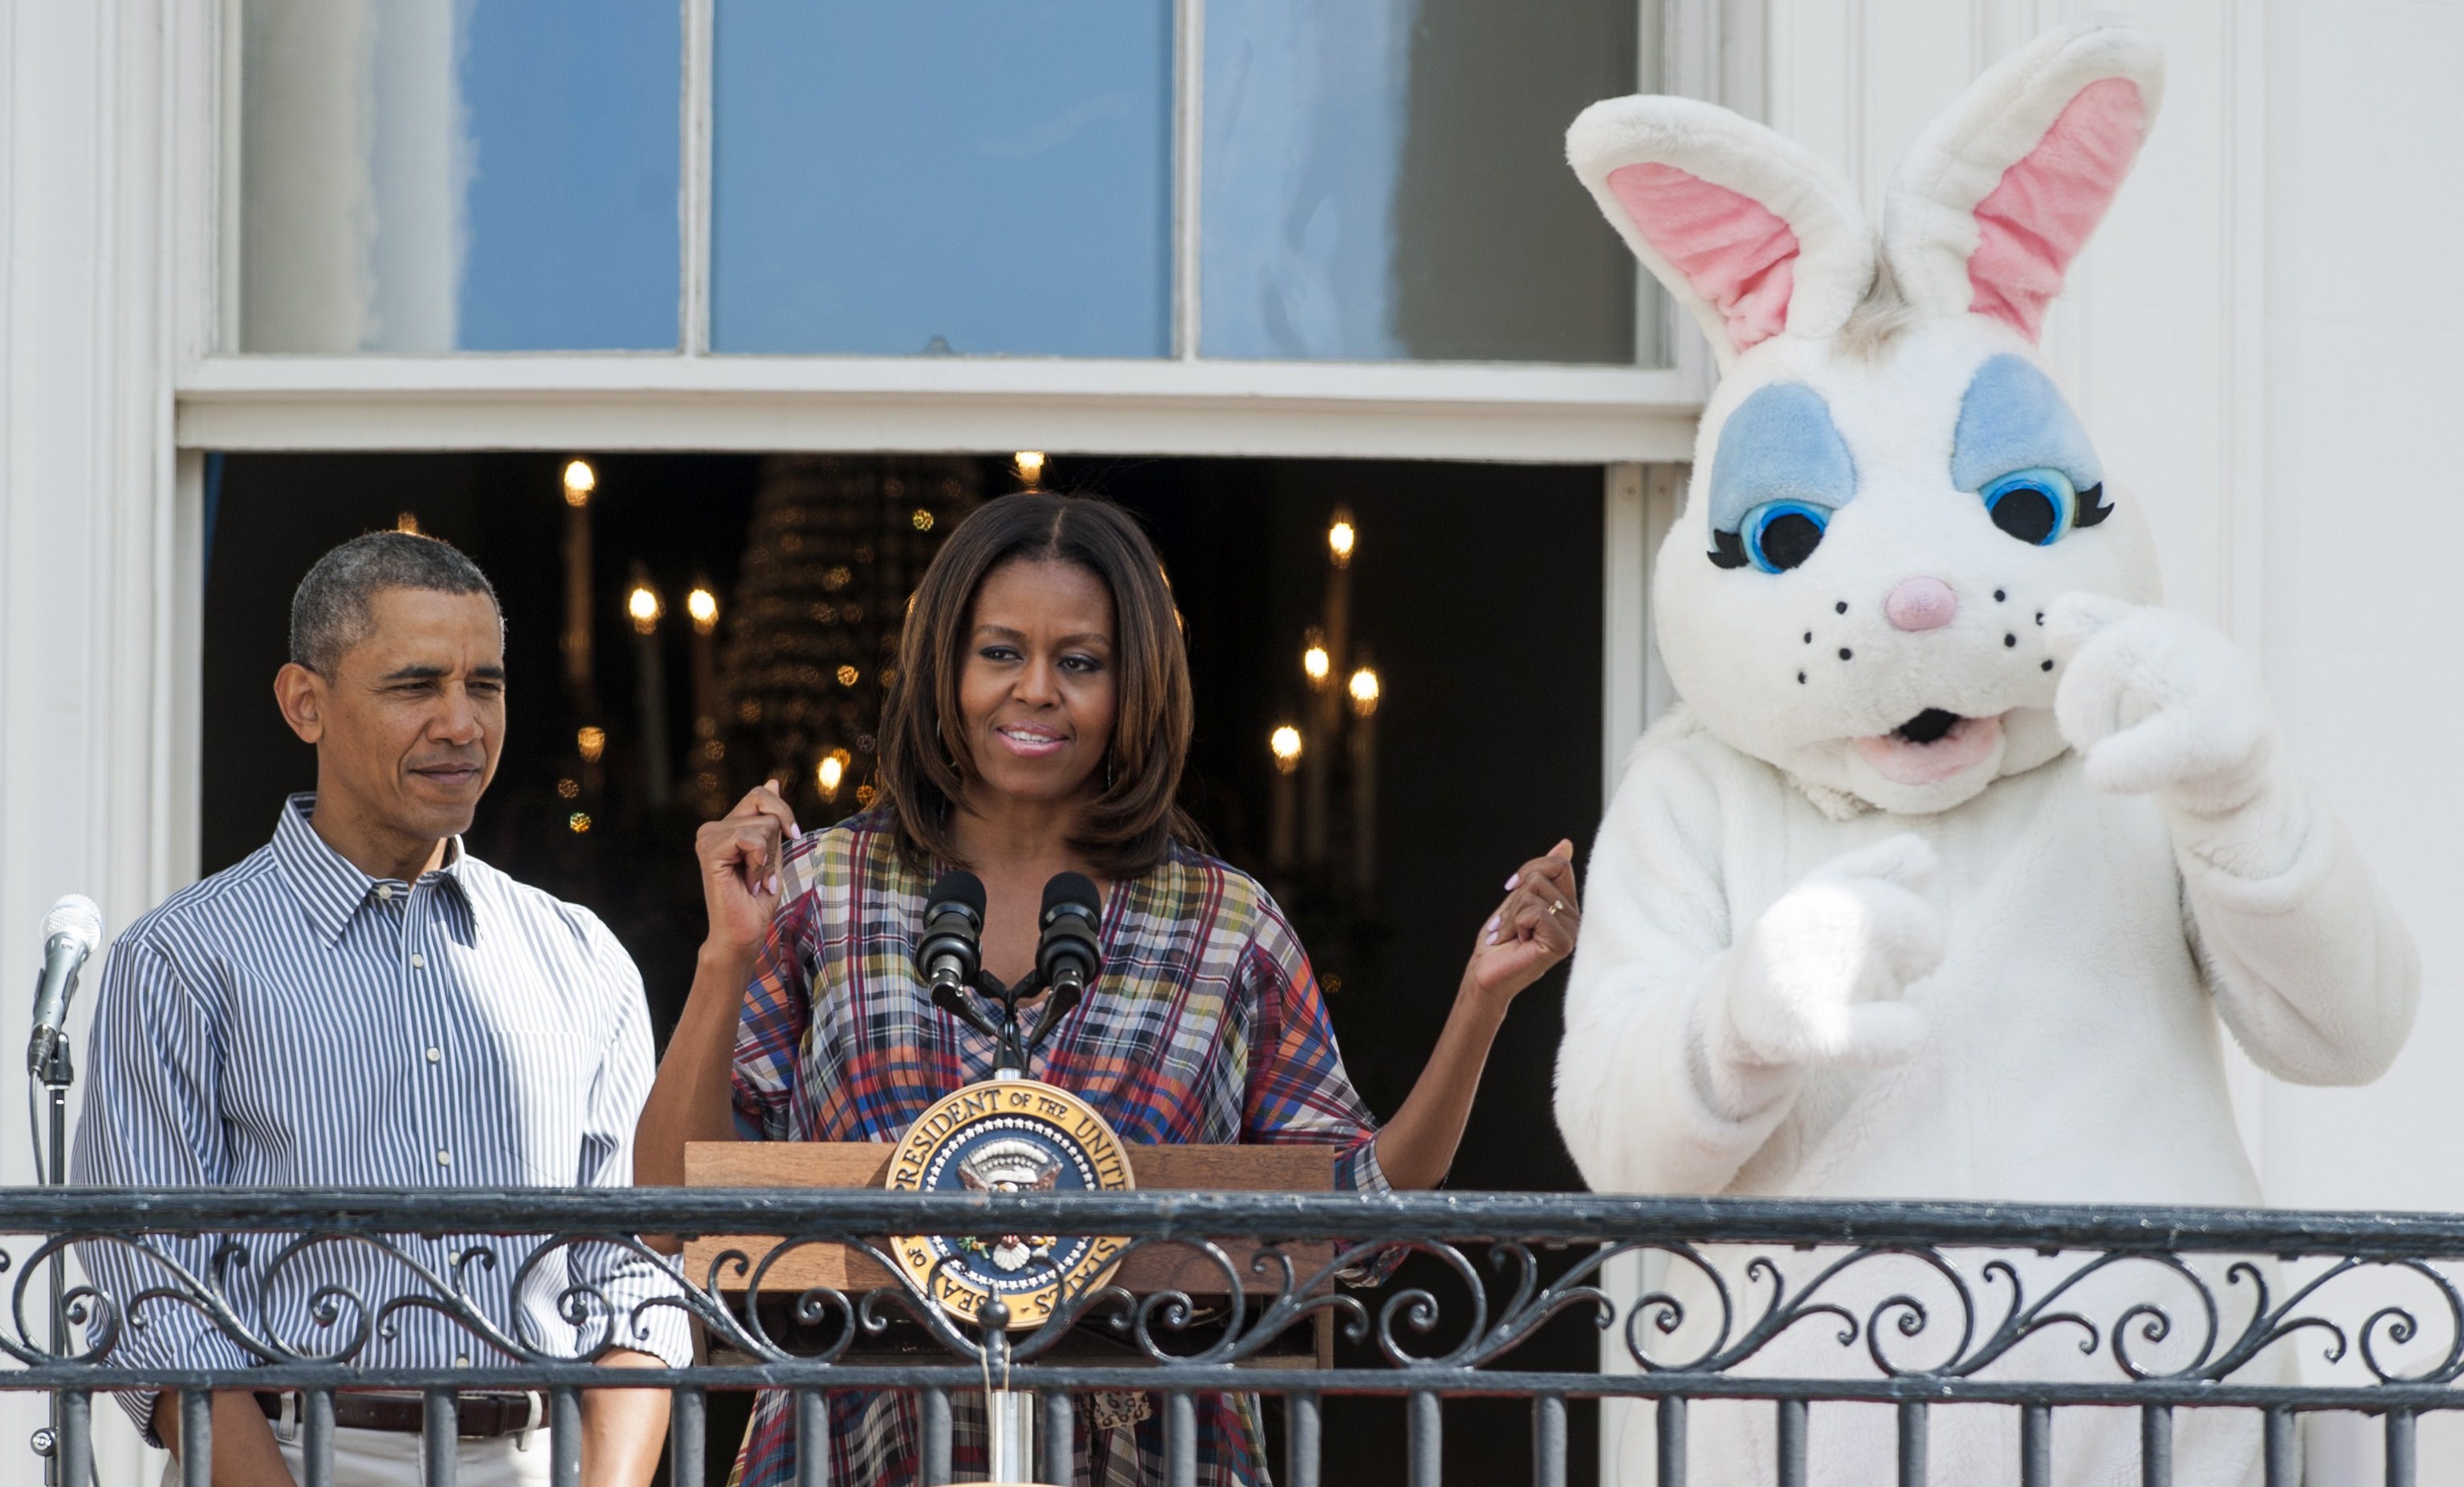 U.S. First Lady Michelle Obama speaks alongside President Barack Obama and the Easter Bunny during the annual White House Easter Egg Roll on the South Lawn of the White House in Washington, D.C., on April 21, 2014 (SAUL LOEB—AFP/Getty Images)